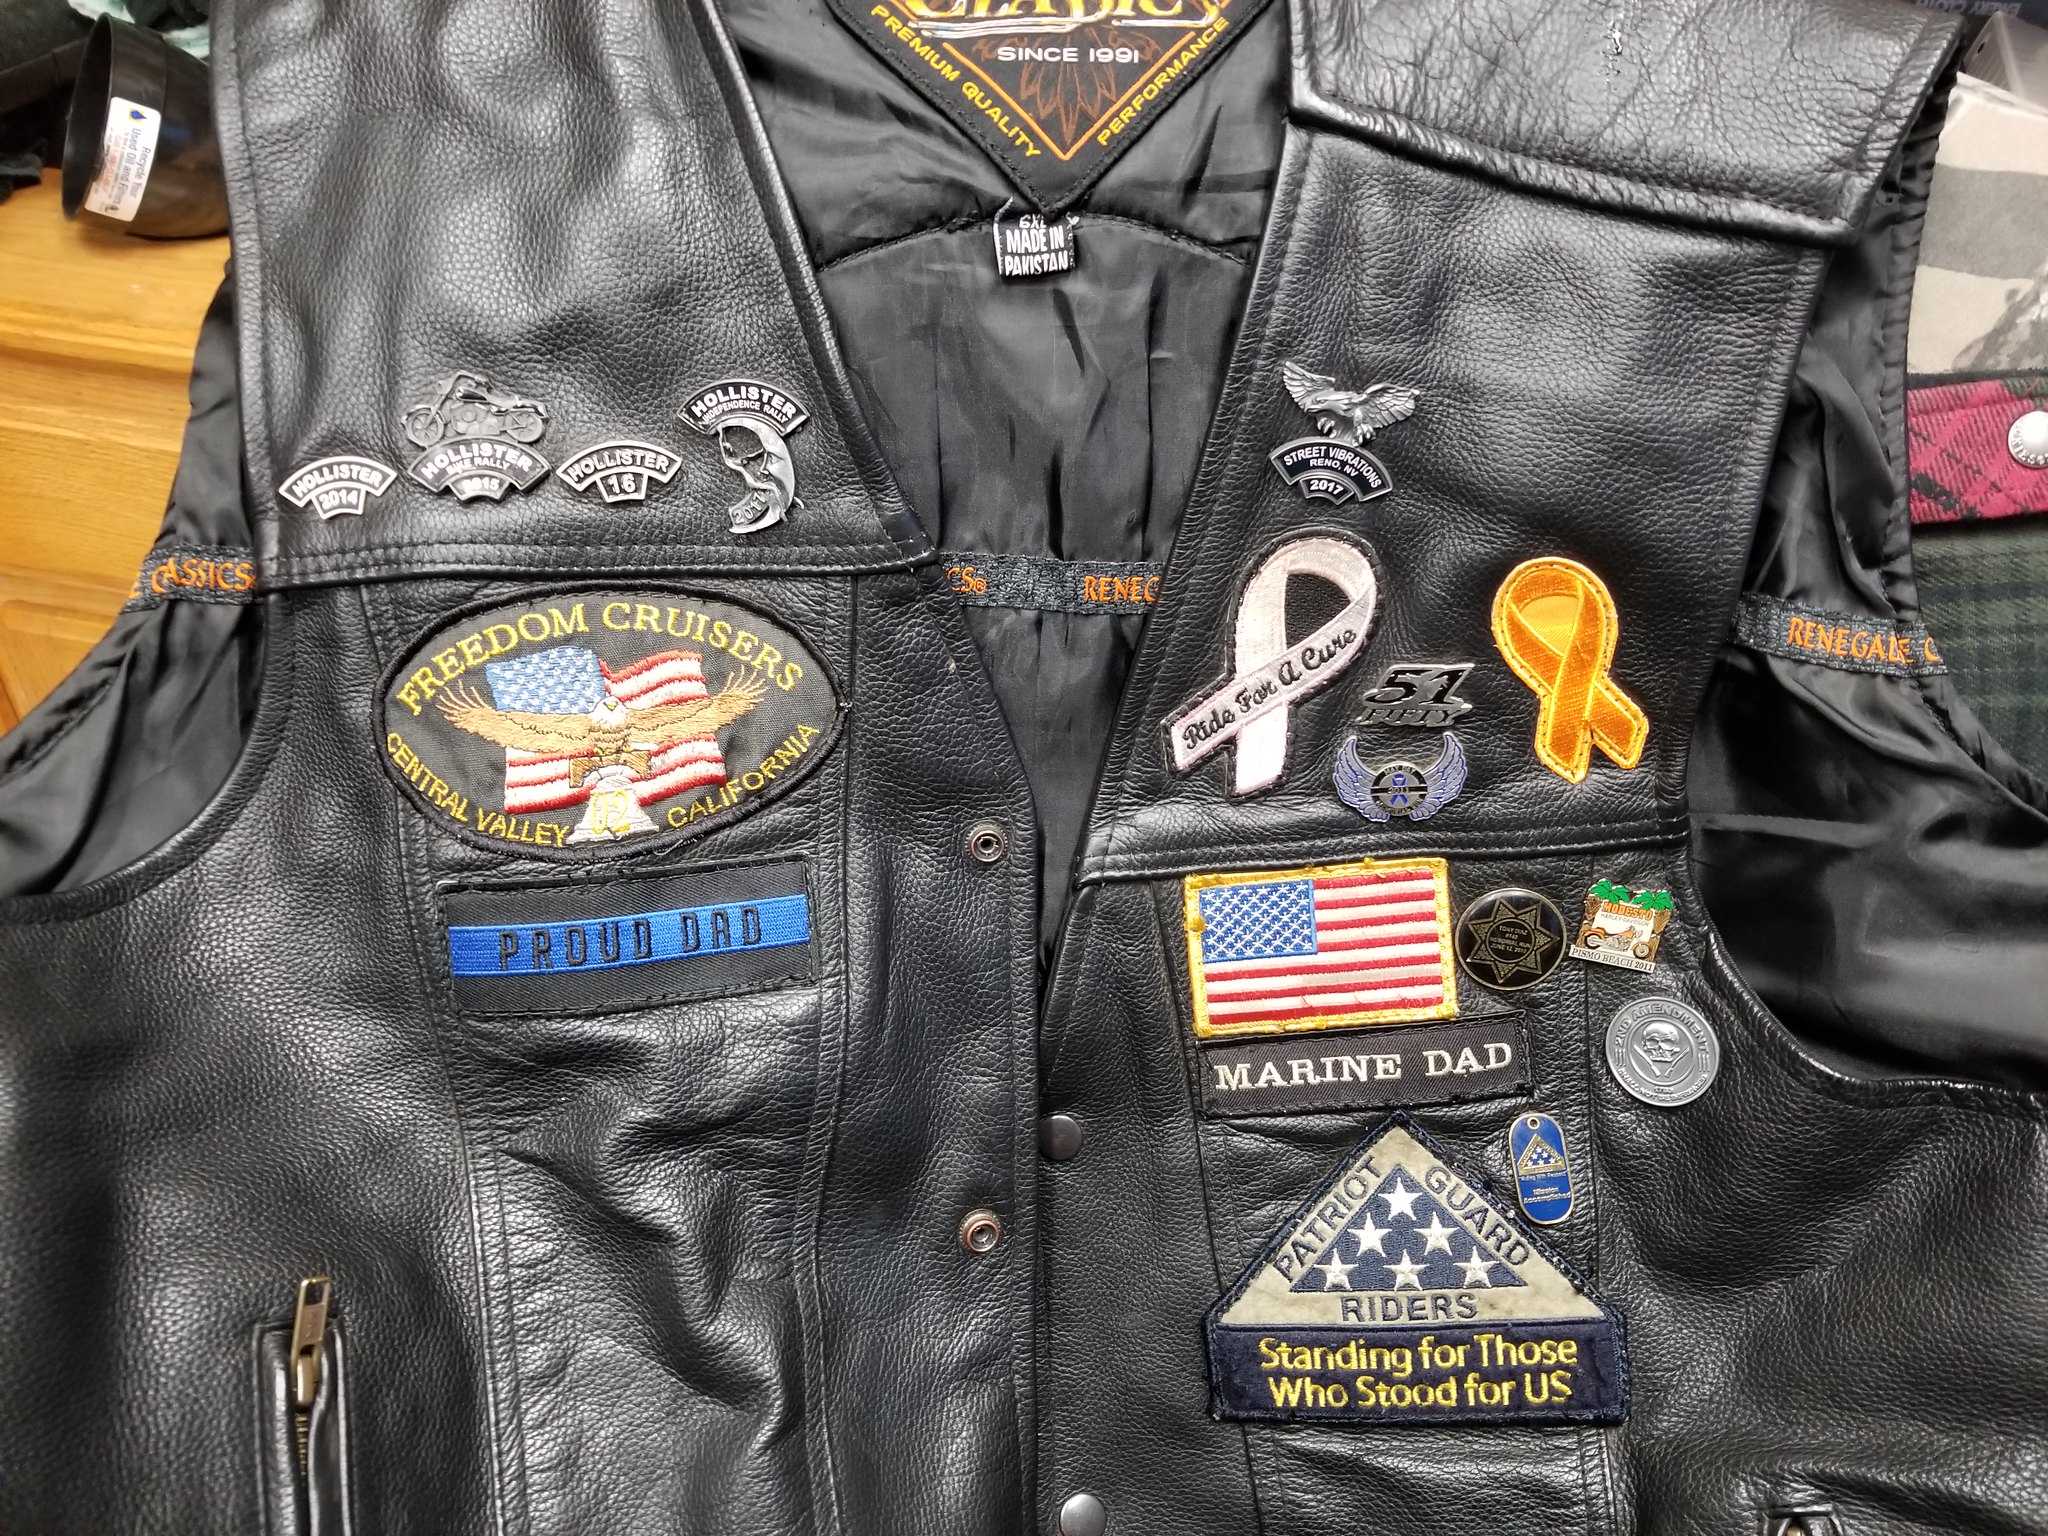 Let's see those patches! | Indian Motorcycle Forum